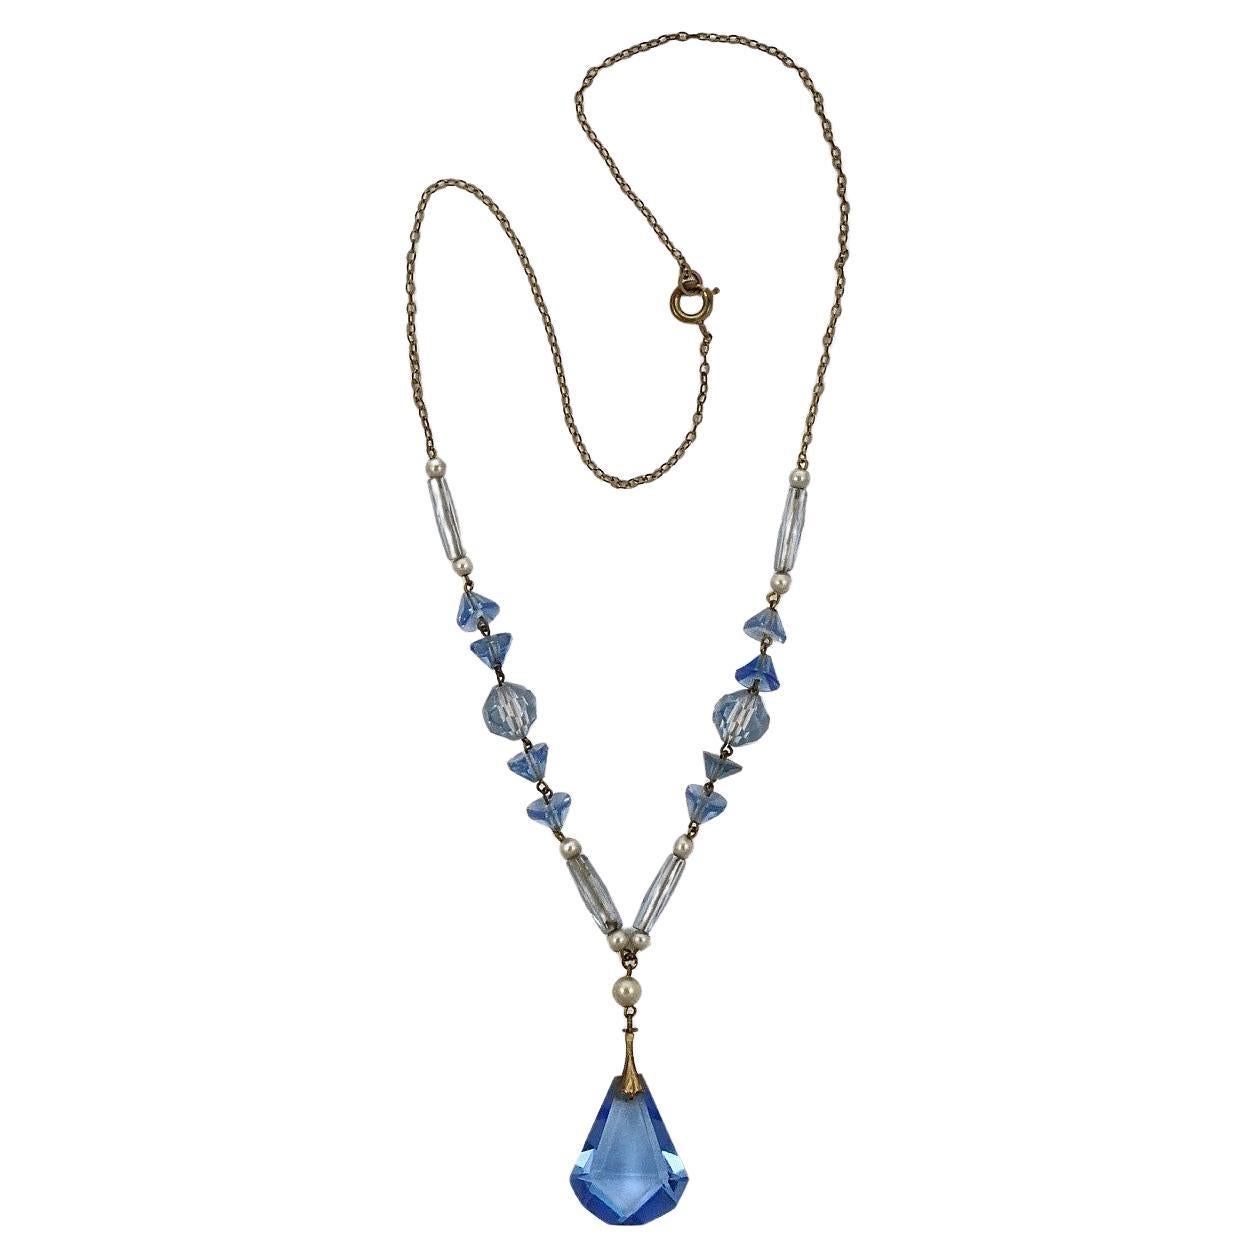 Art Deco Gold Tone Blue Glass Faux Pearl Necklace with Drop Pendant For Sale